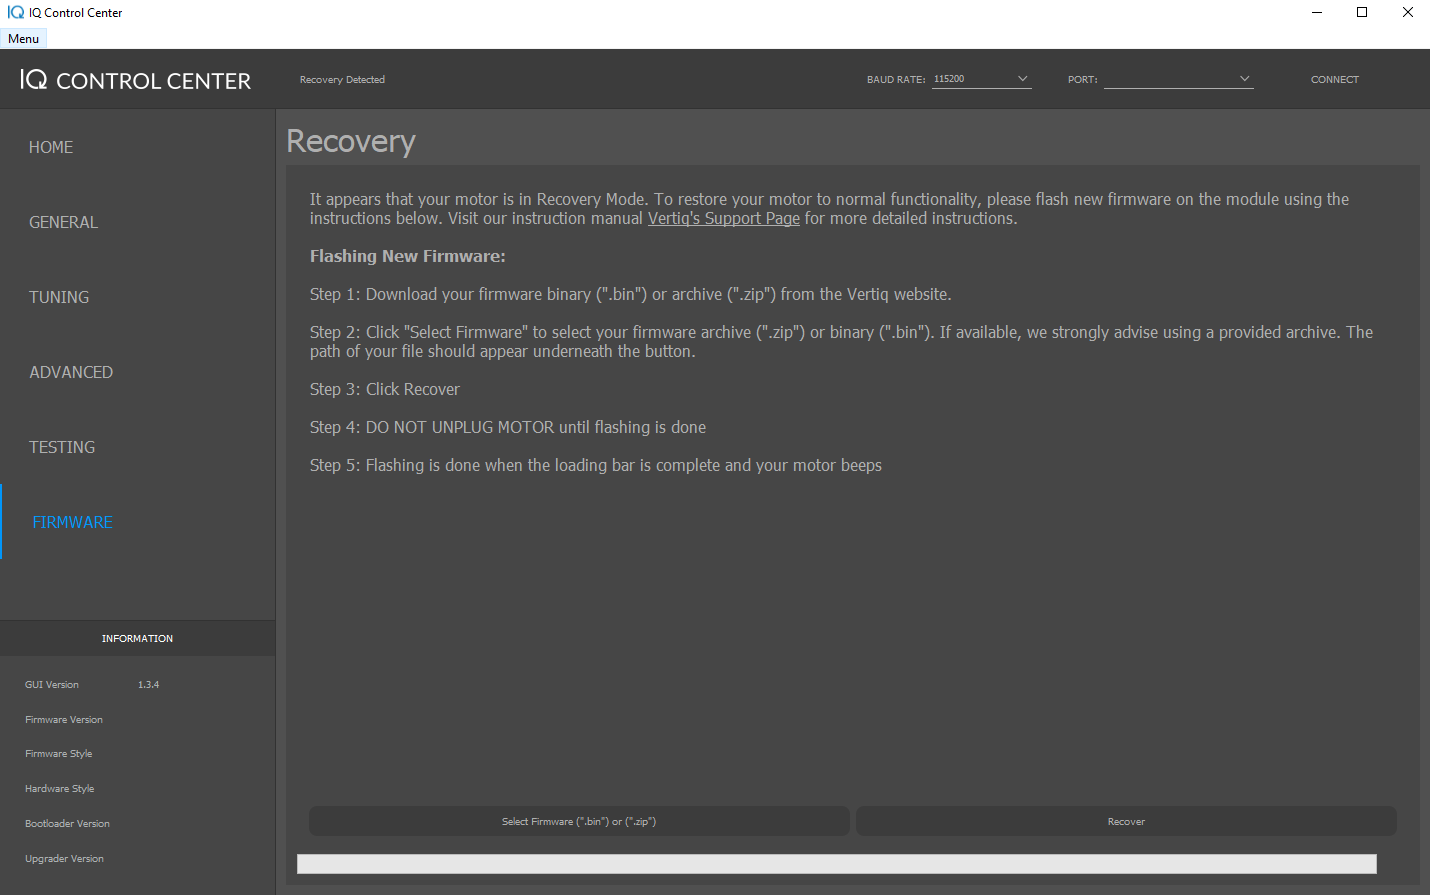 Recovery Tab